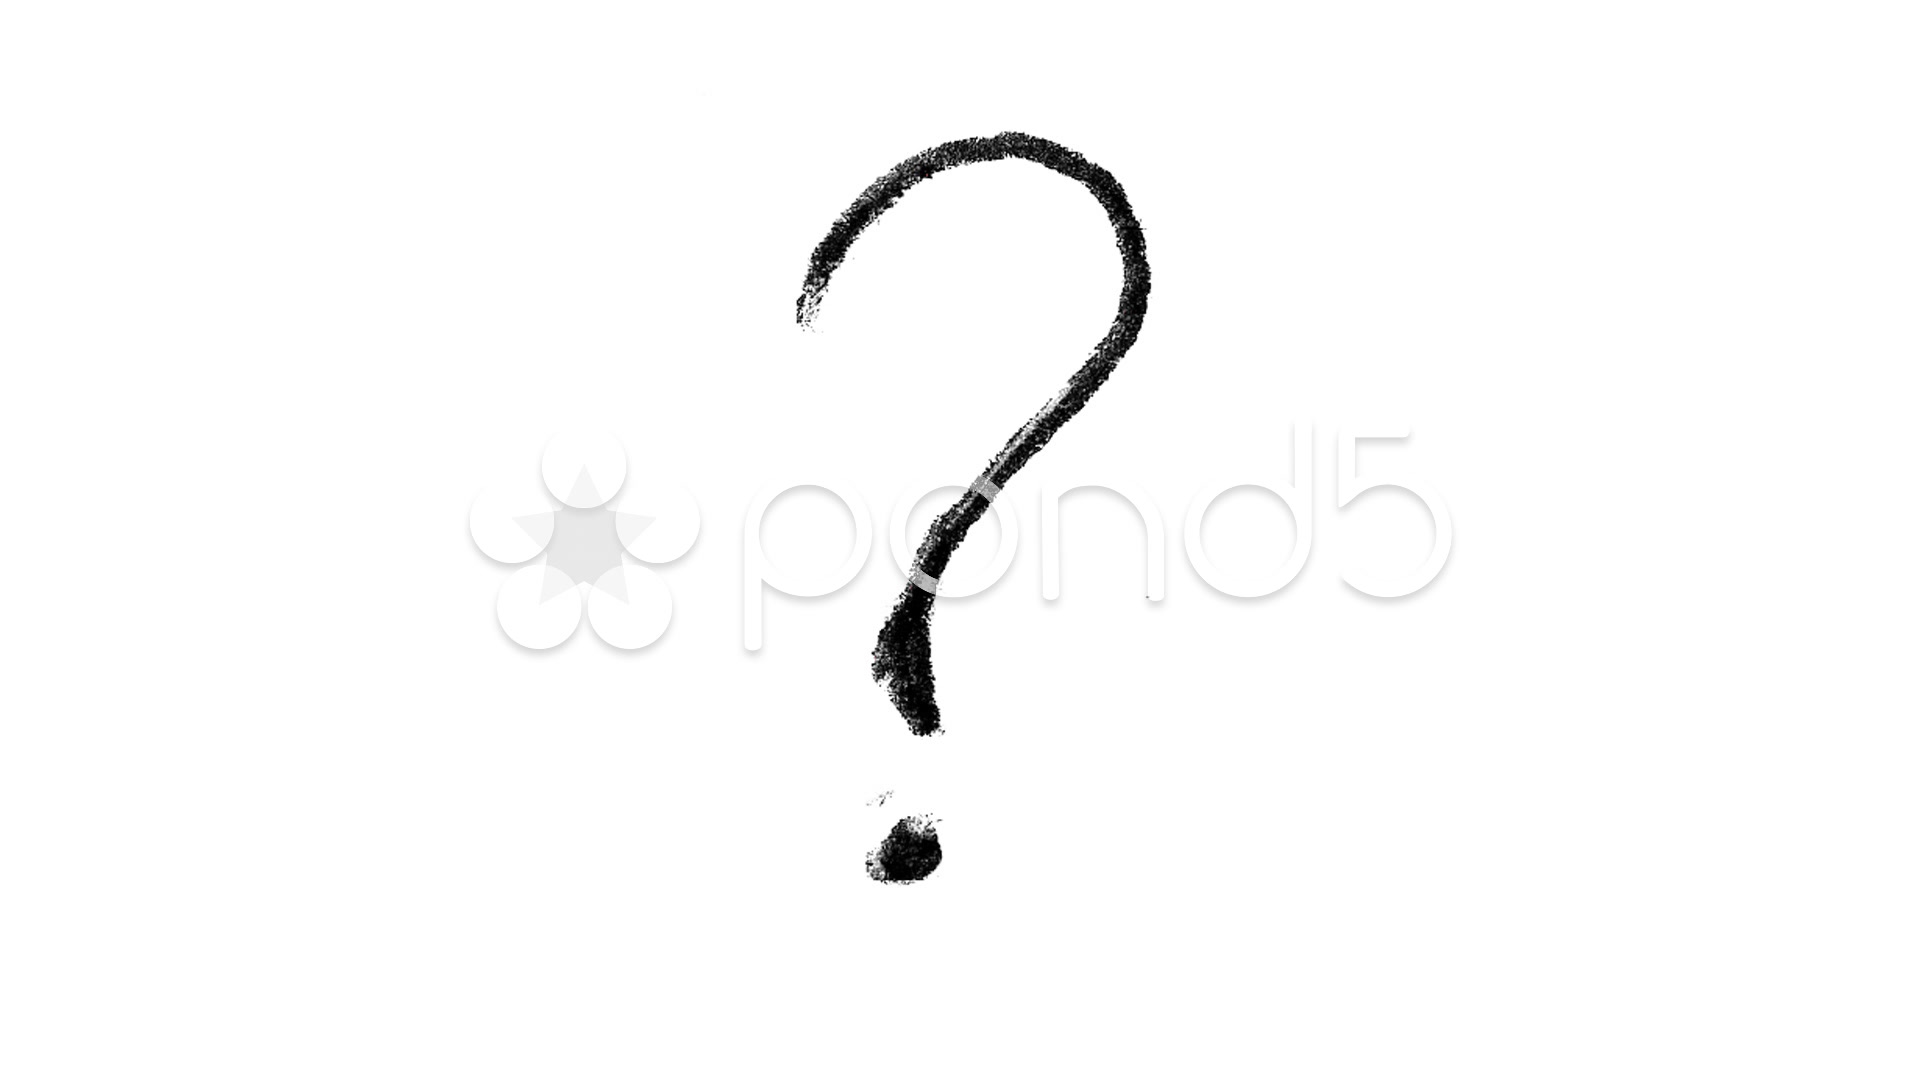 Question Mark Animation Flashing Question mark / animation | IMAGEIF